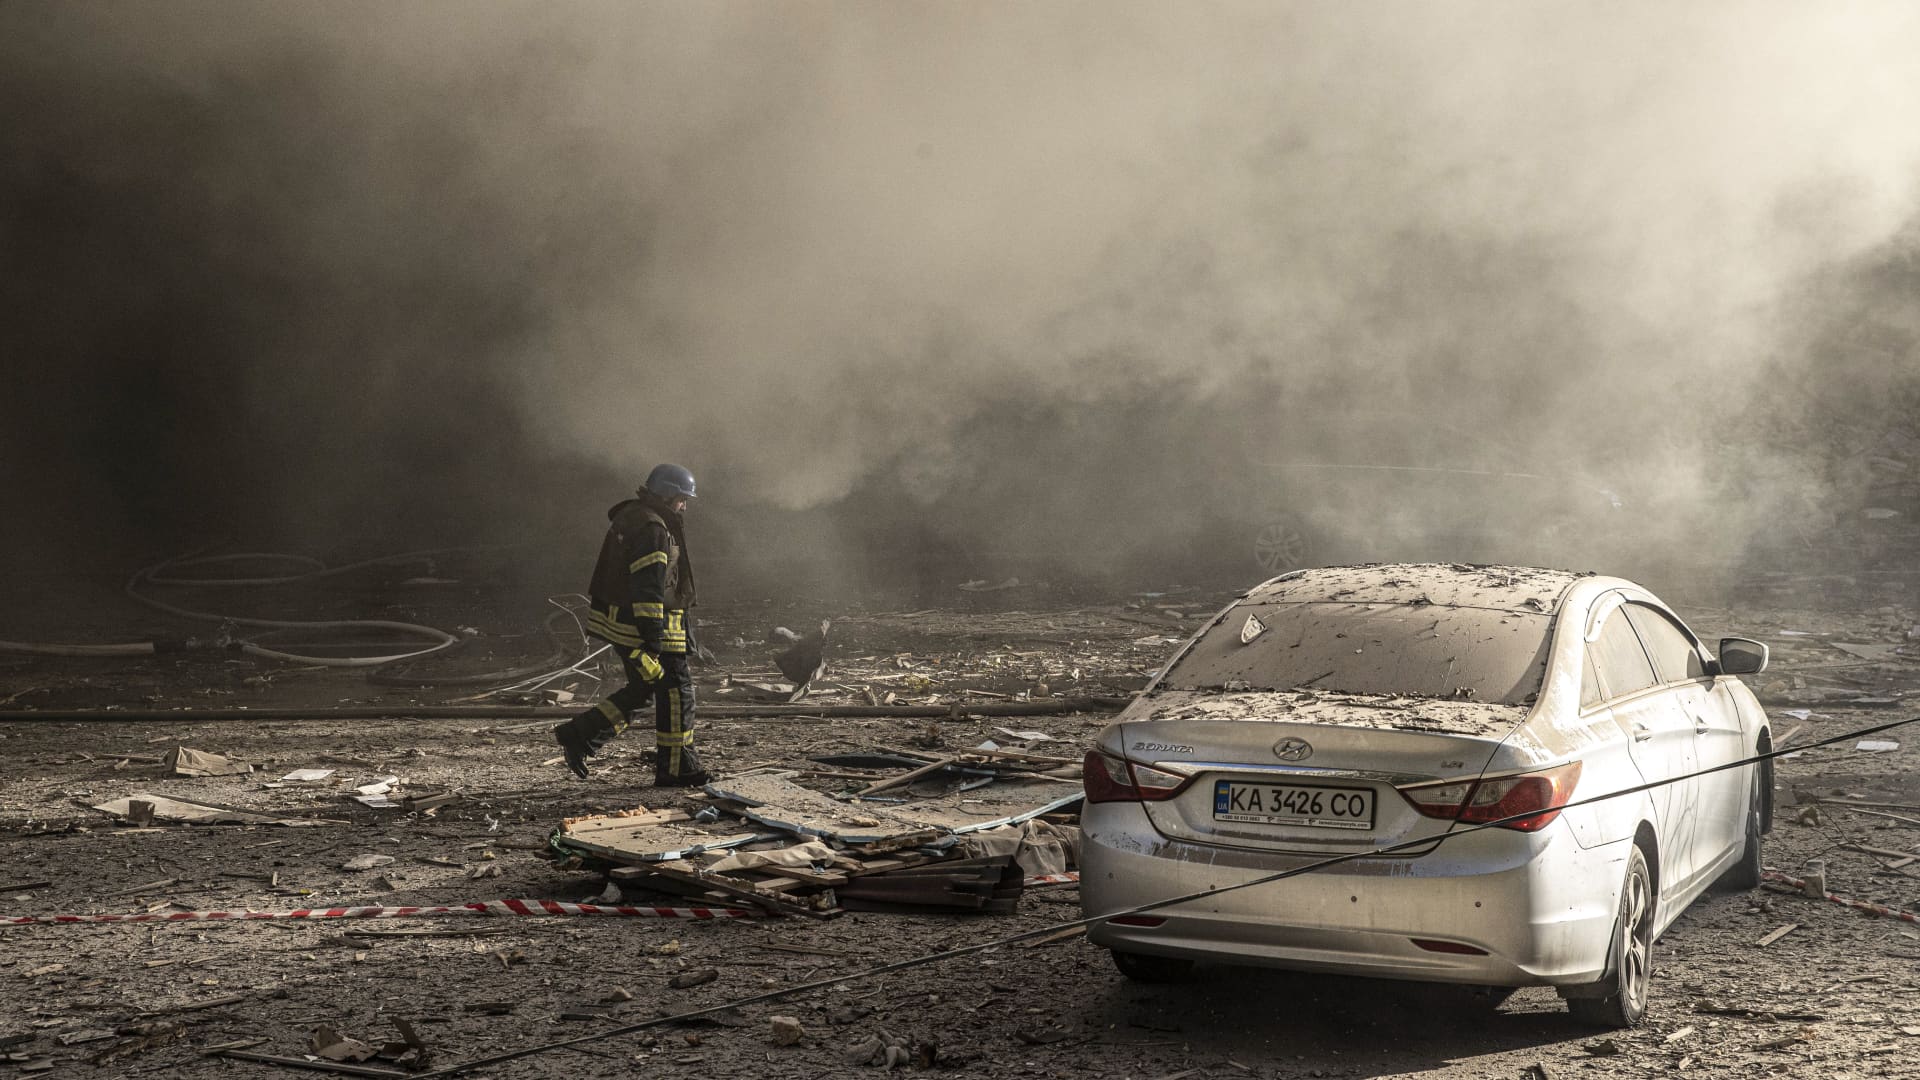 Firefighters conduct work after the Russian drone attacks in Kyiv, Ukraine on October 17, 2022. At least 4 separate explosions were heard in Kyiv, while authorities reported that the attacks were carried out with kamikaze drones.